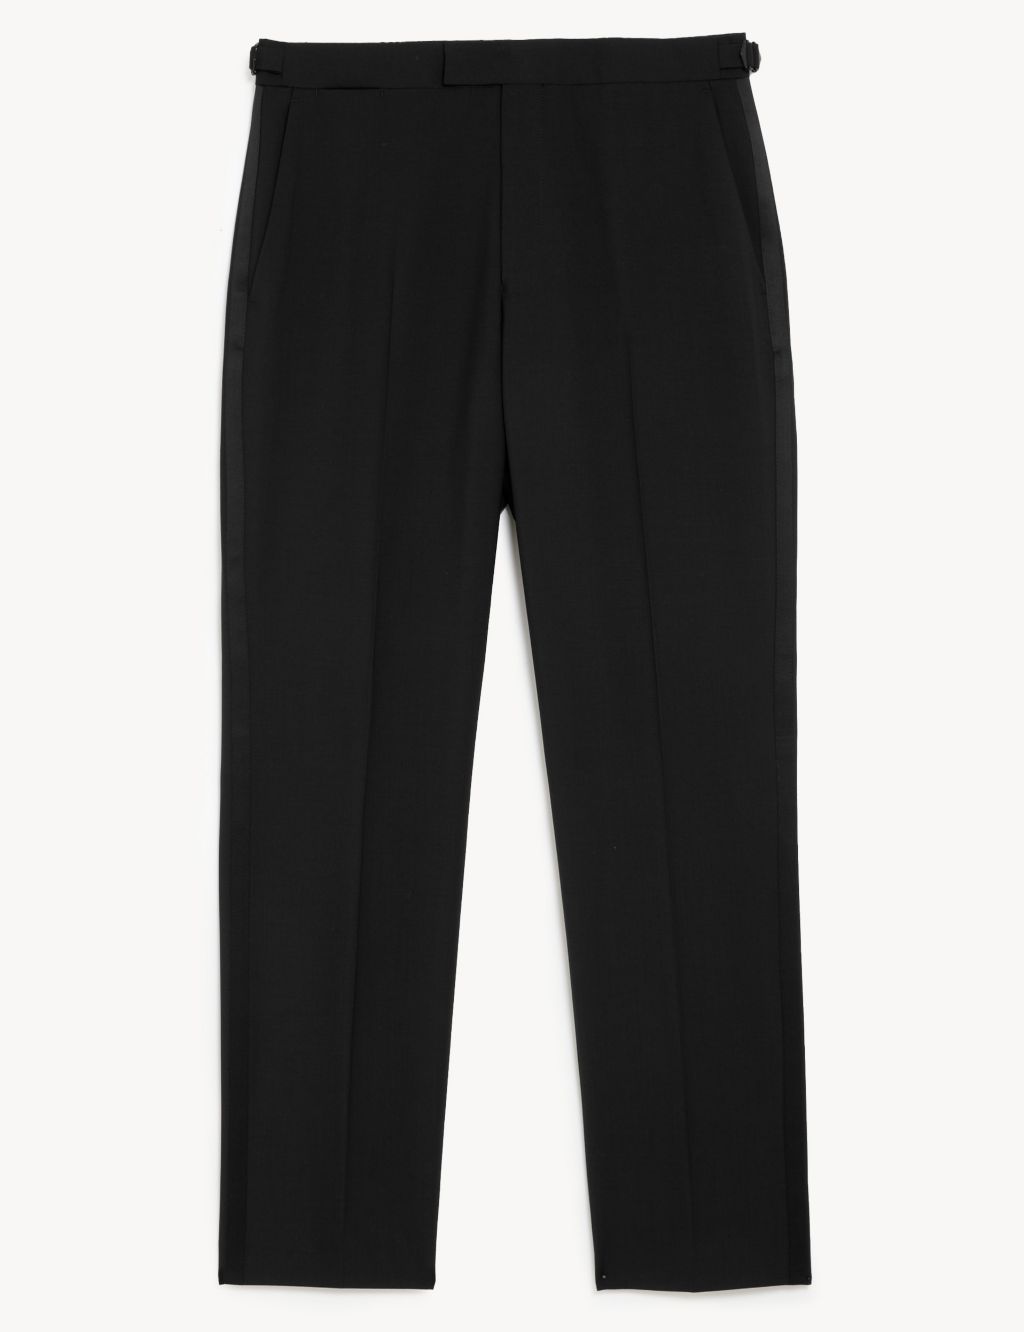 Tailored Fit Pure Wool Trousers image 1